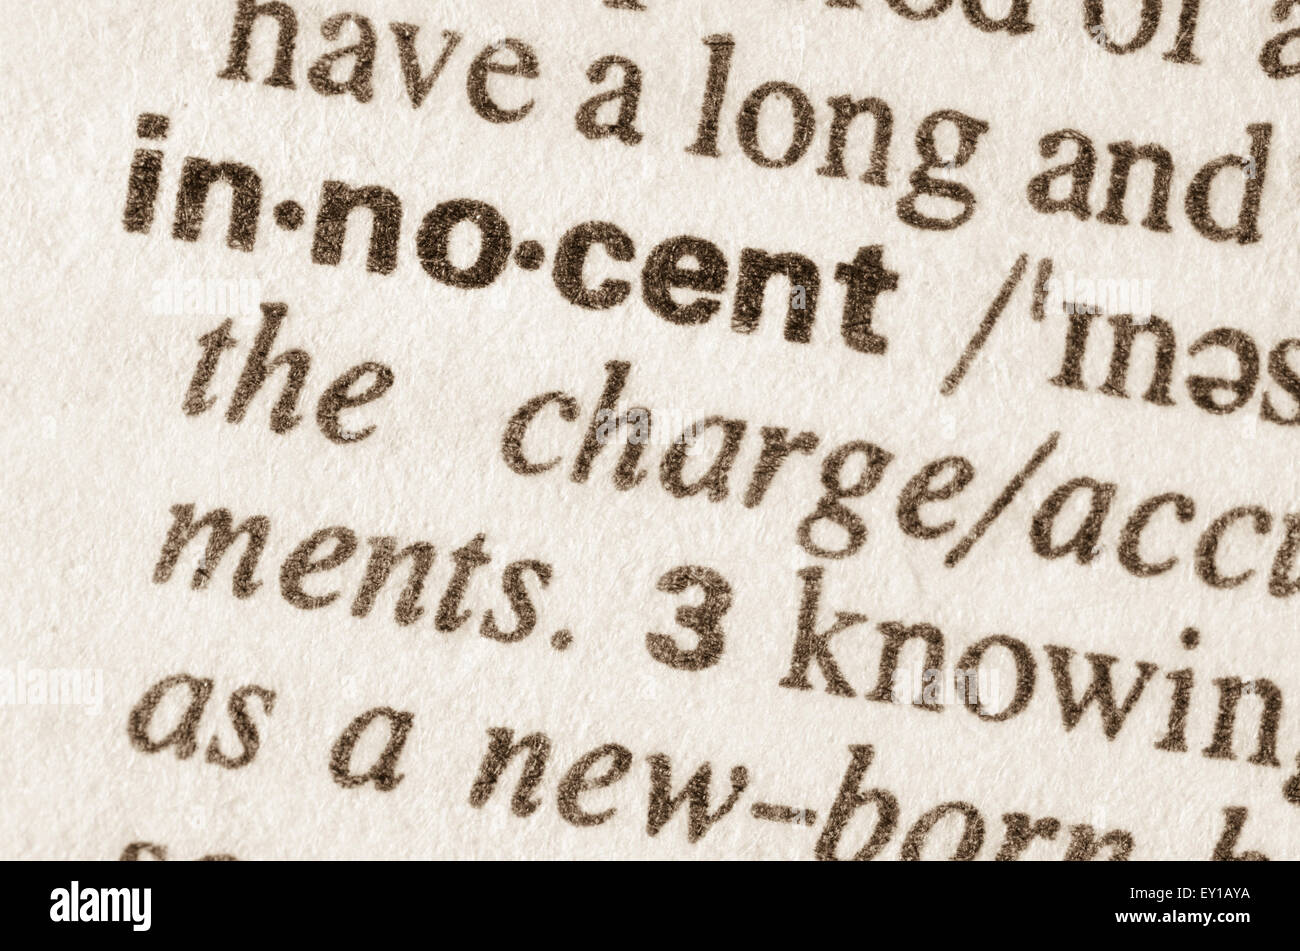 Definition of word innocent in dictionary Stock Photo